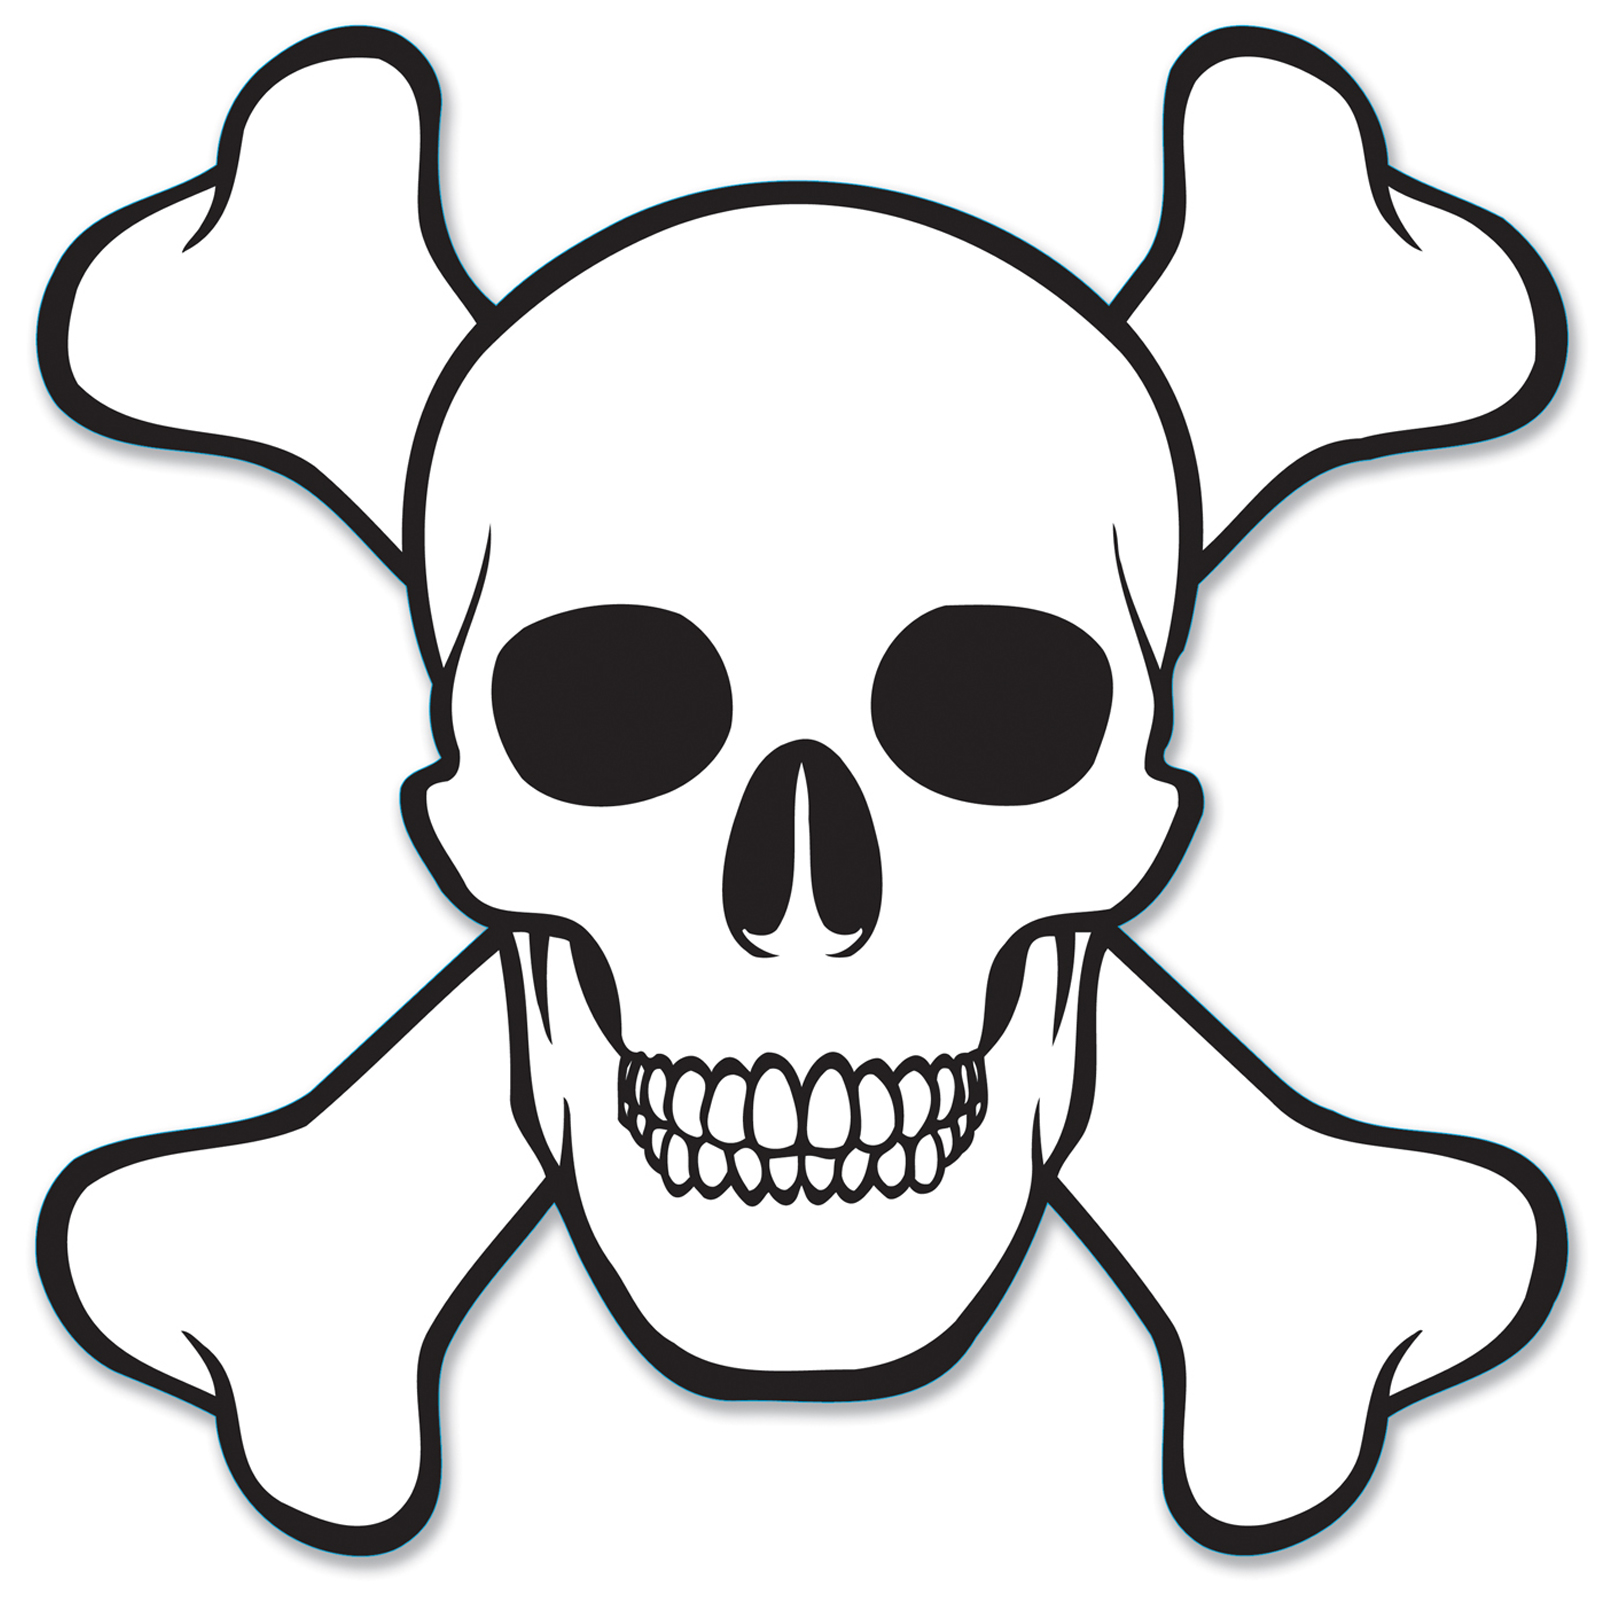 How To Draw Pirate Skull And Crossbones - ClipArt Best